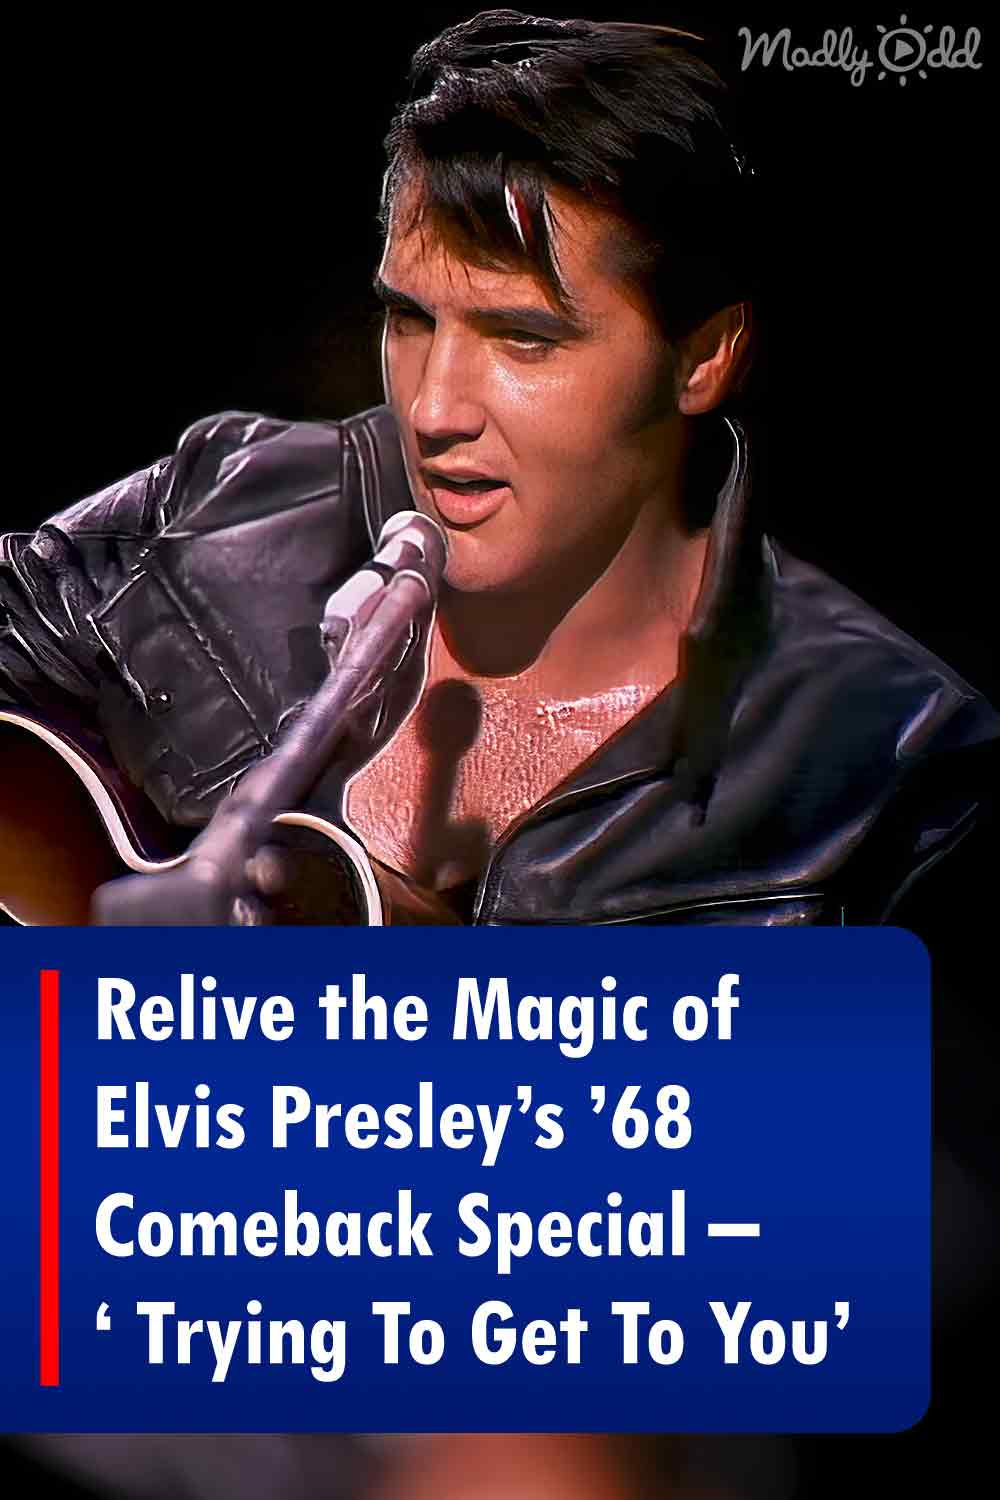 Relive the Magic of Elvis Presley’s ’68 Comeback Special – ‘ Trying To Get To You’